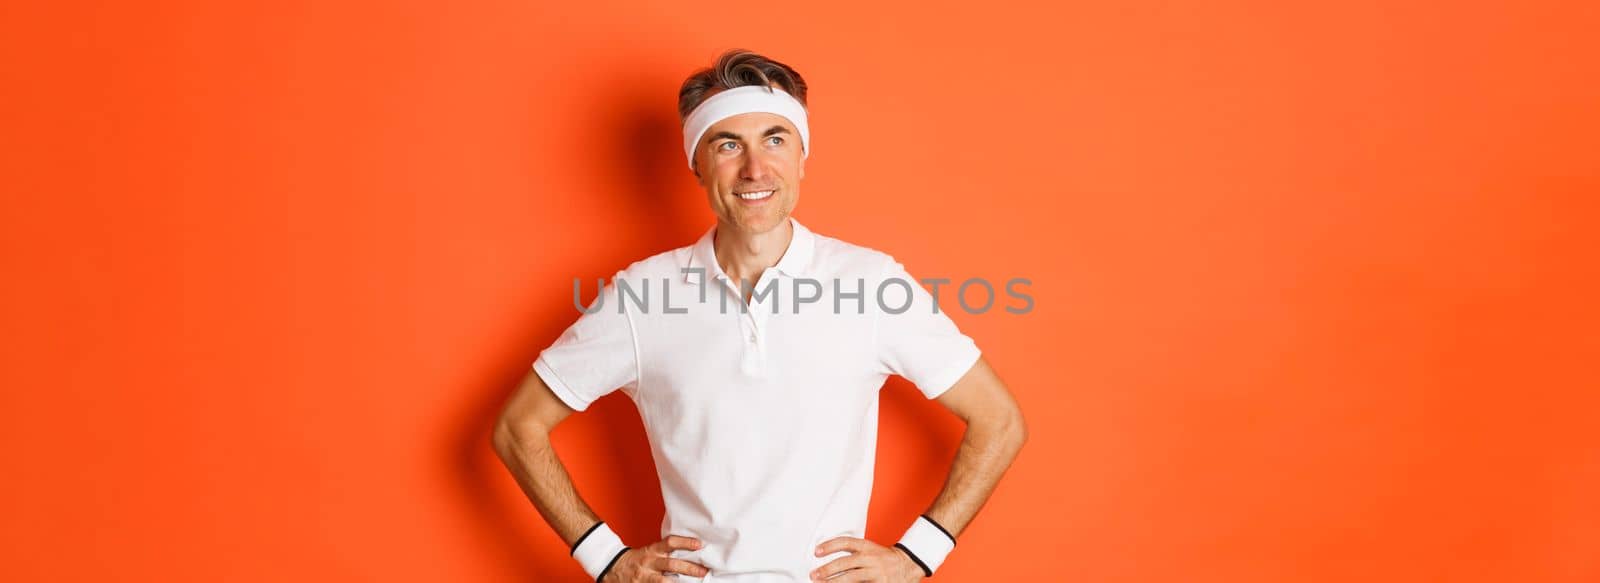 Portrait of satisfied middle-aged man doing sports, looking pleased at upper left corner and smiling, workout to stay healthy, standing over orange background.